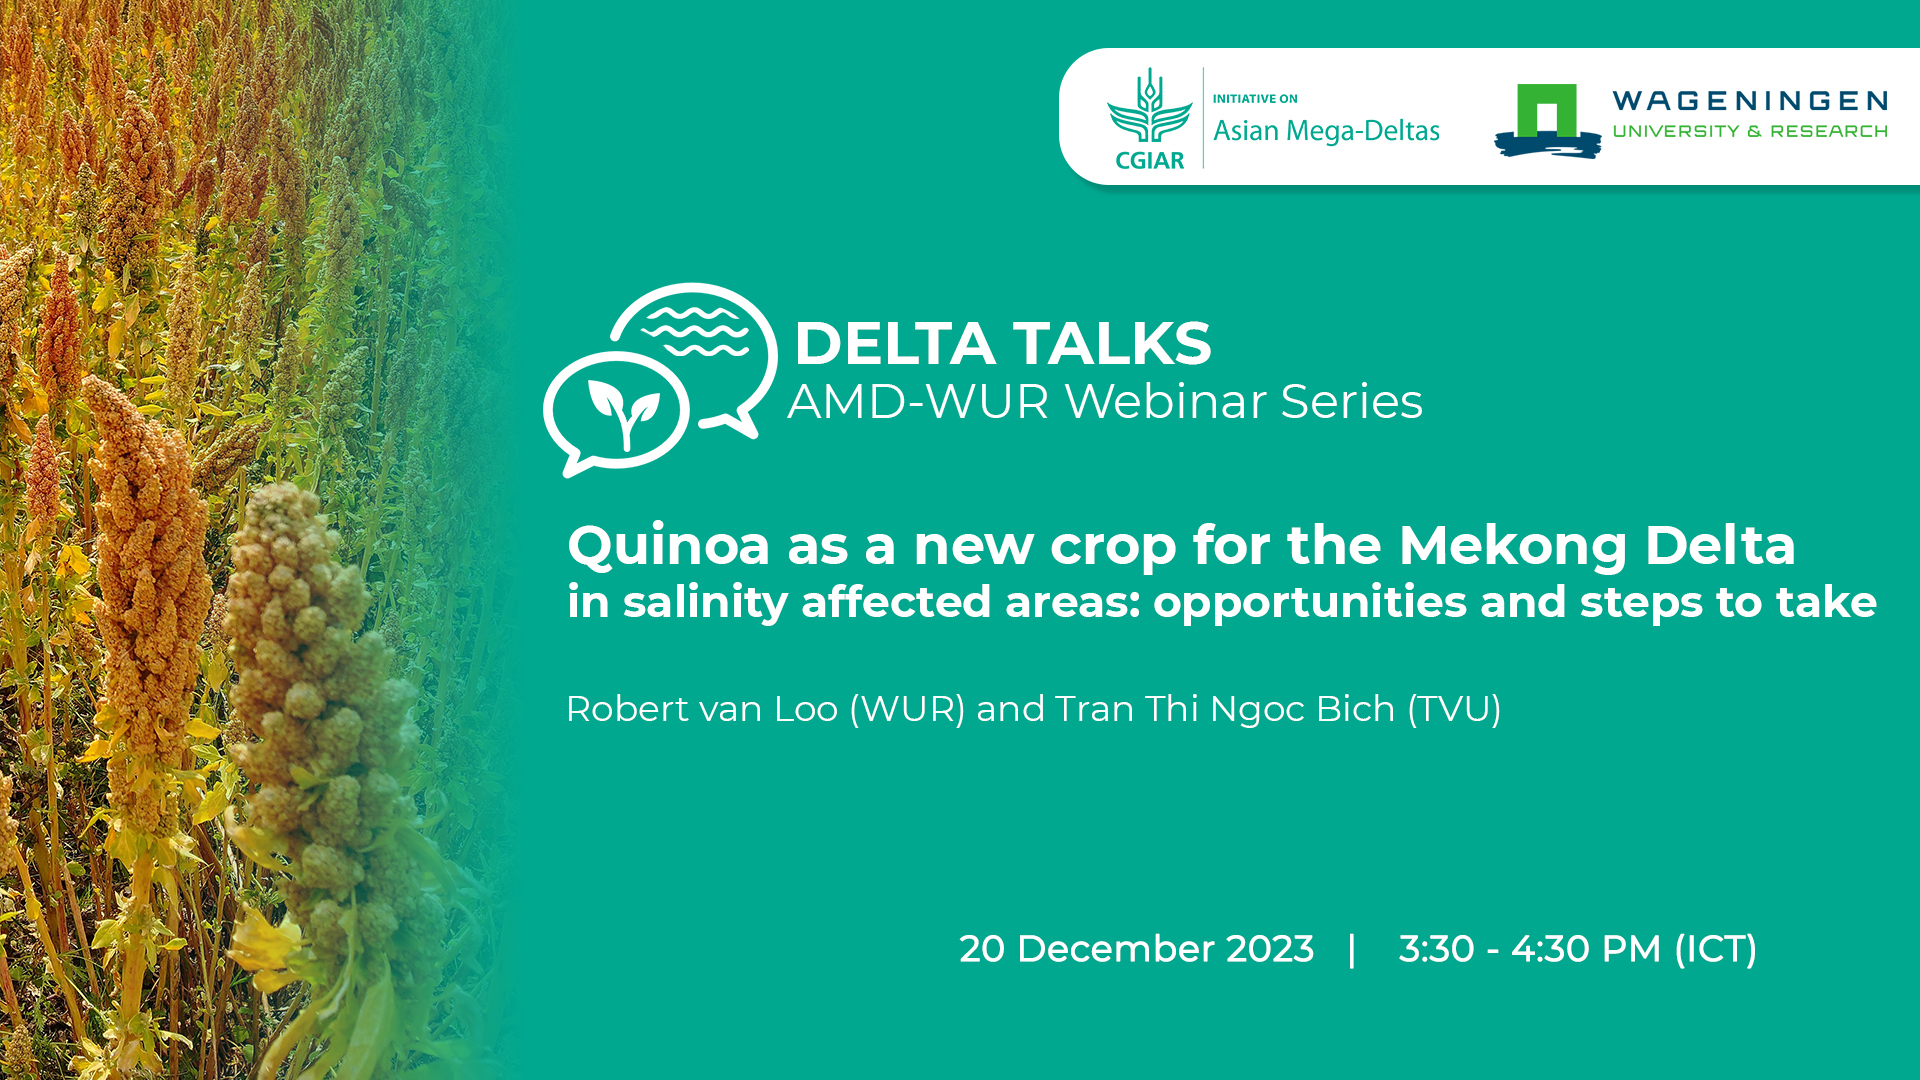 A collaboration between AMD and WUR, Delta Talks is a webinar series focusing on the development and results of research activities on securing food systems and strengthening climate resilience in the Asian mega-deltas.